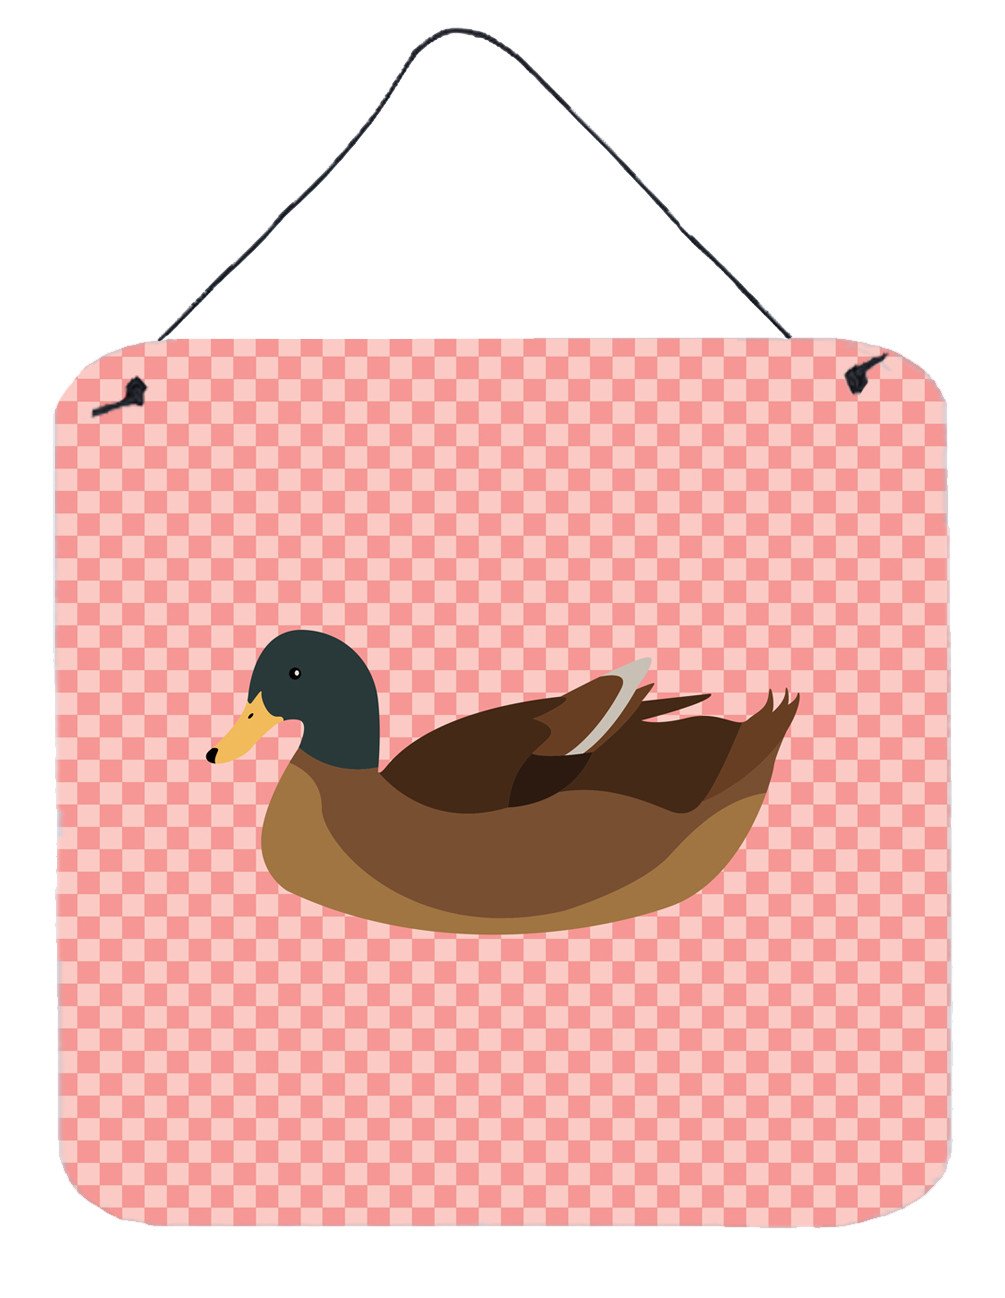 Khaki Campbell Duck Pink Check Wall or Door Hanging Prints BB7866DS66 by Caroline's Treasures